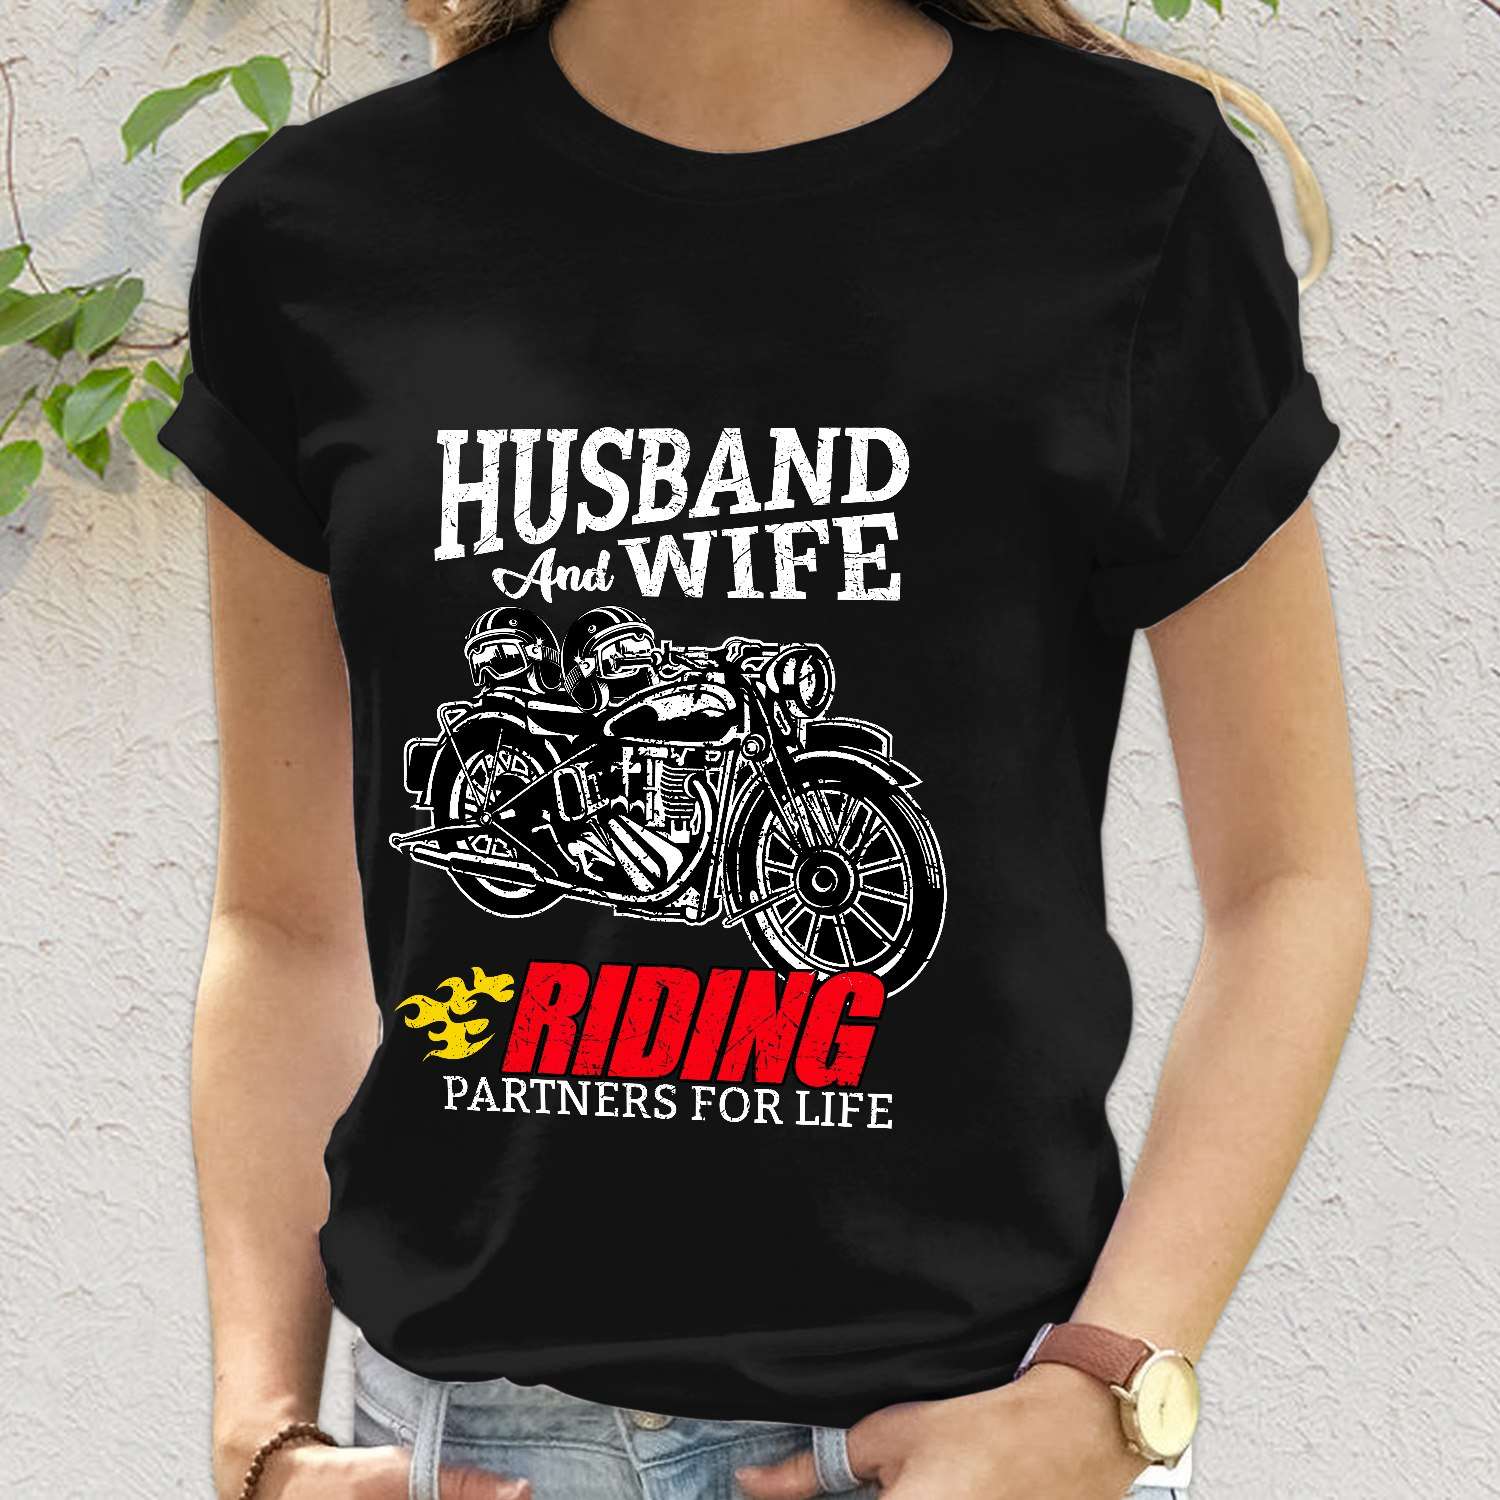 Husband and wife, riding partners for life - Biker couple